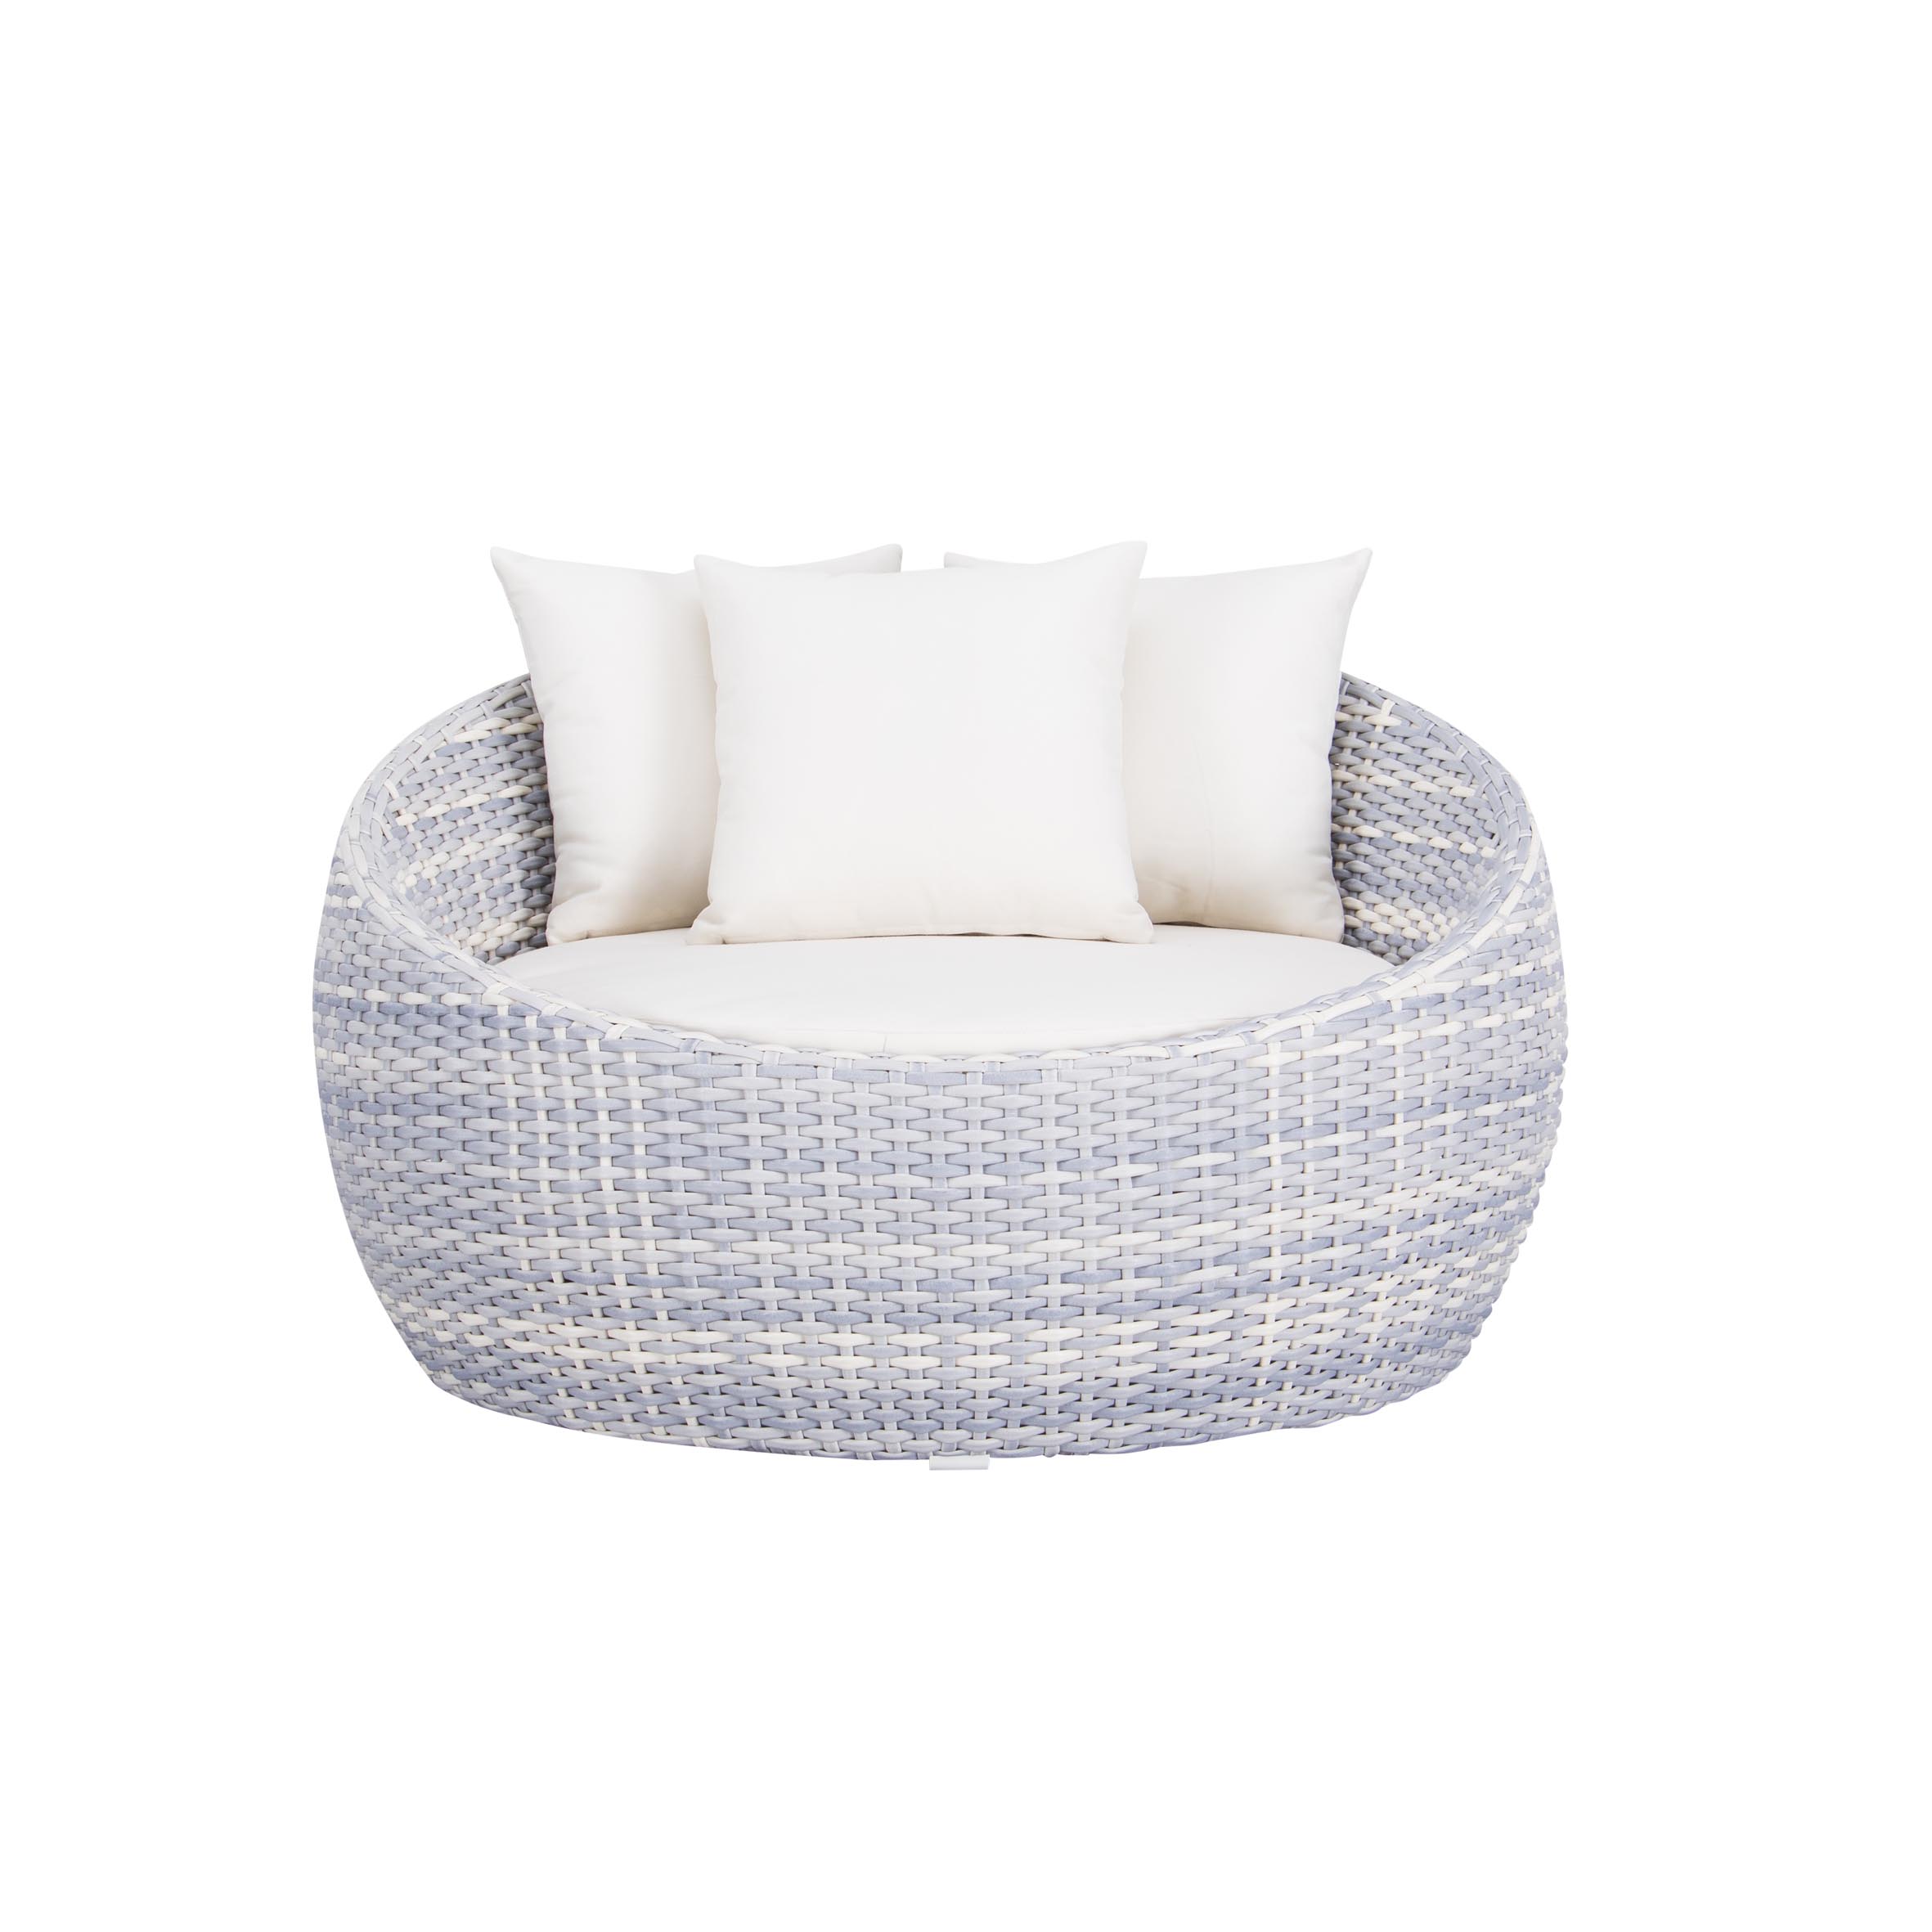 Sky rotan rûne daybed Featured Image